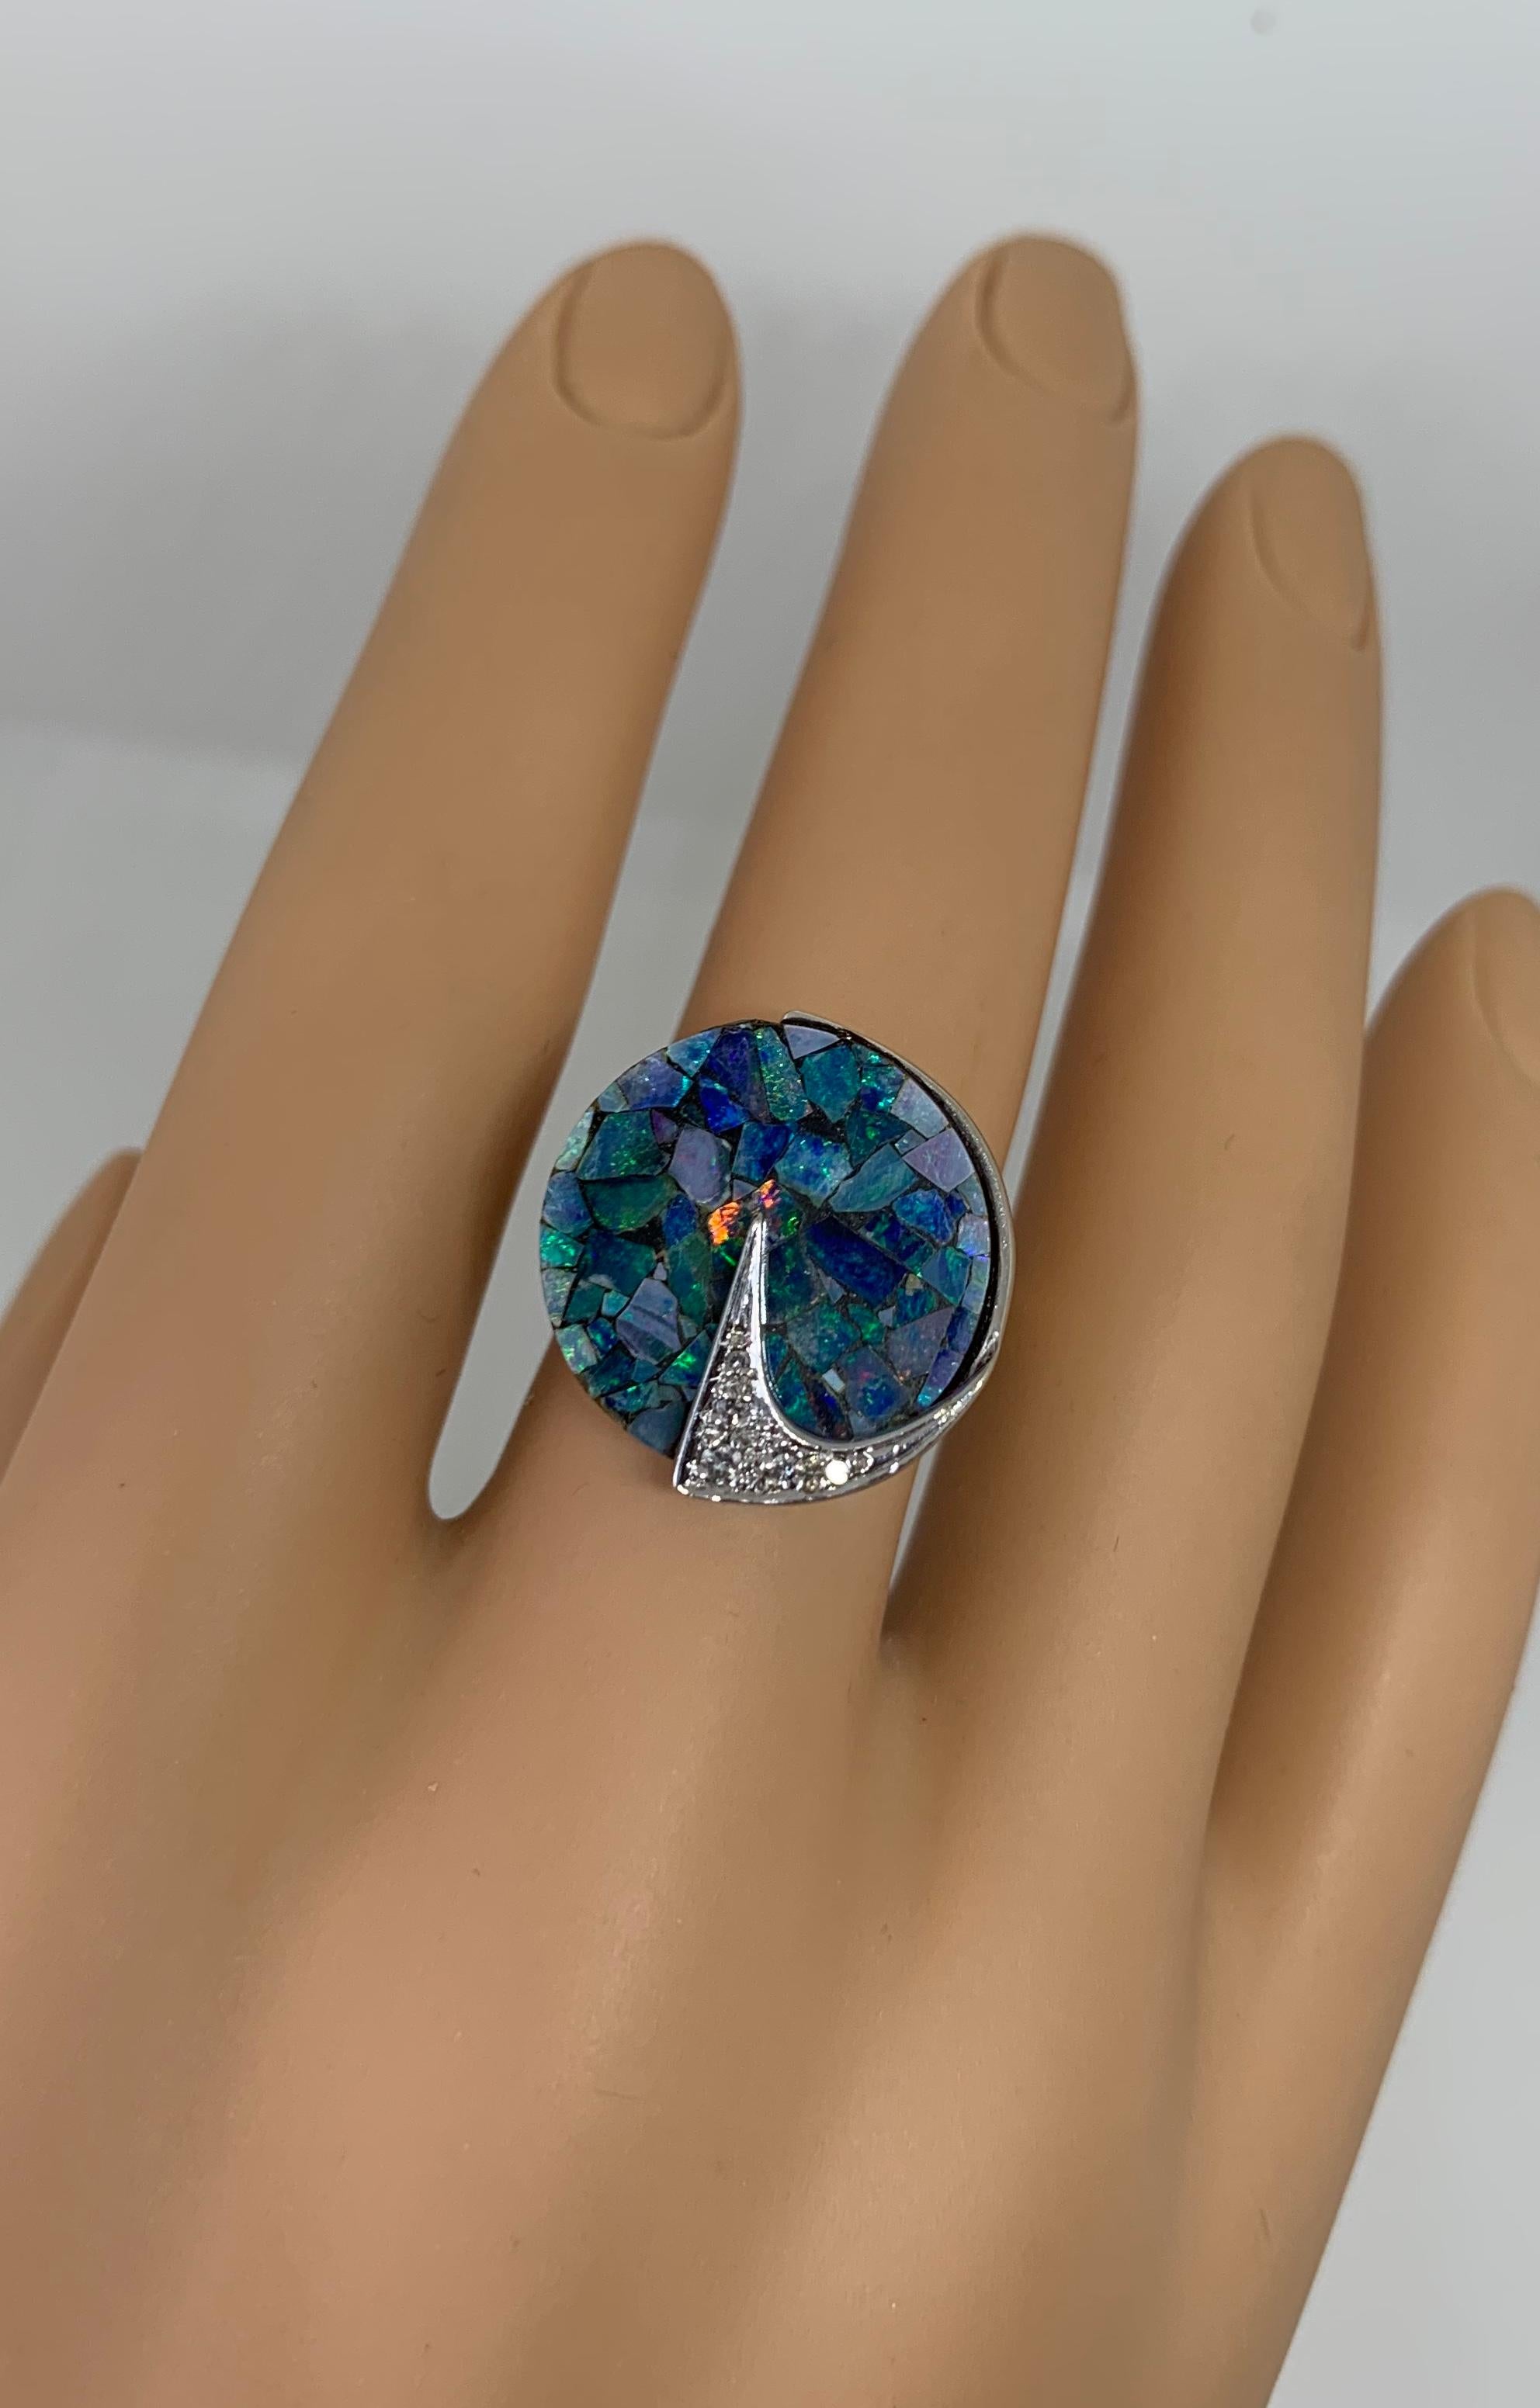 THIS IS A WONDERFUL MID-CENTURY MODERNIST EAMES ERA BLACK OPAL AND DIAMOND RING IN 14K YELLOW AND WHITE GOLD WITH A STUNNING MATRIX DESIGN.
The effect of the gorgeous natural black opals set in a circular matrix design is stunning.  The opals are